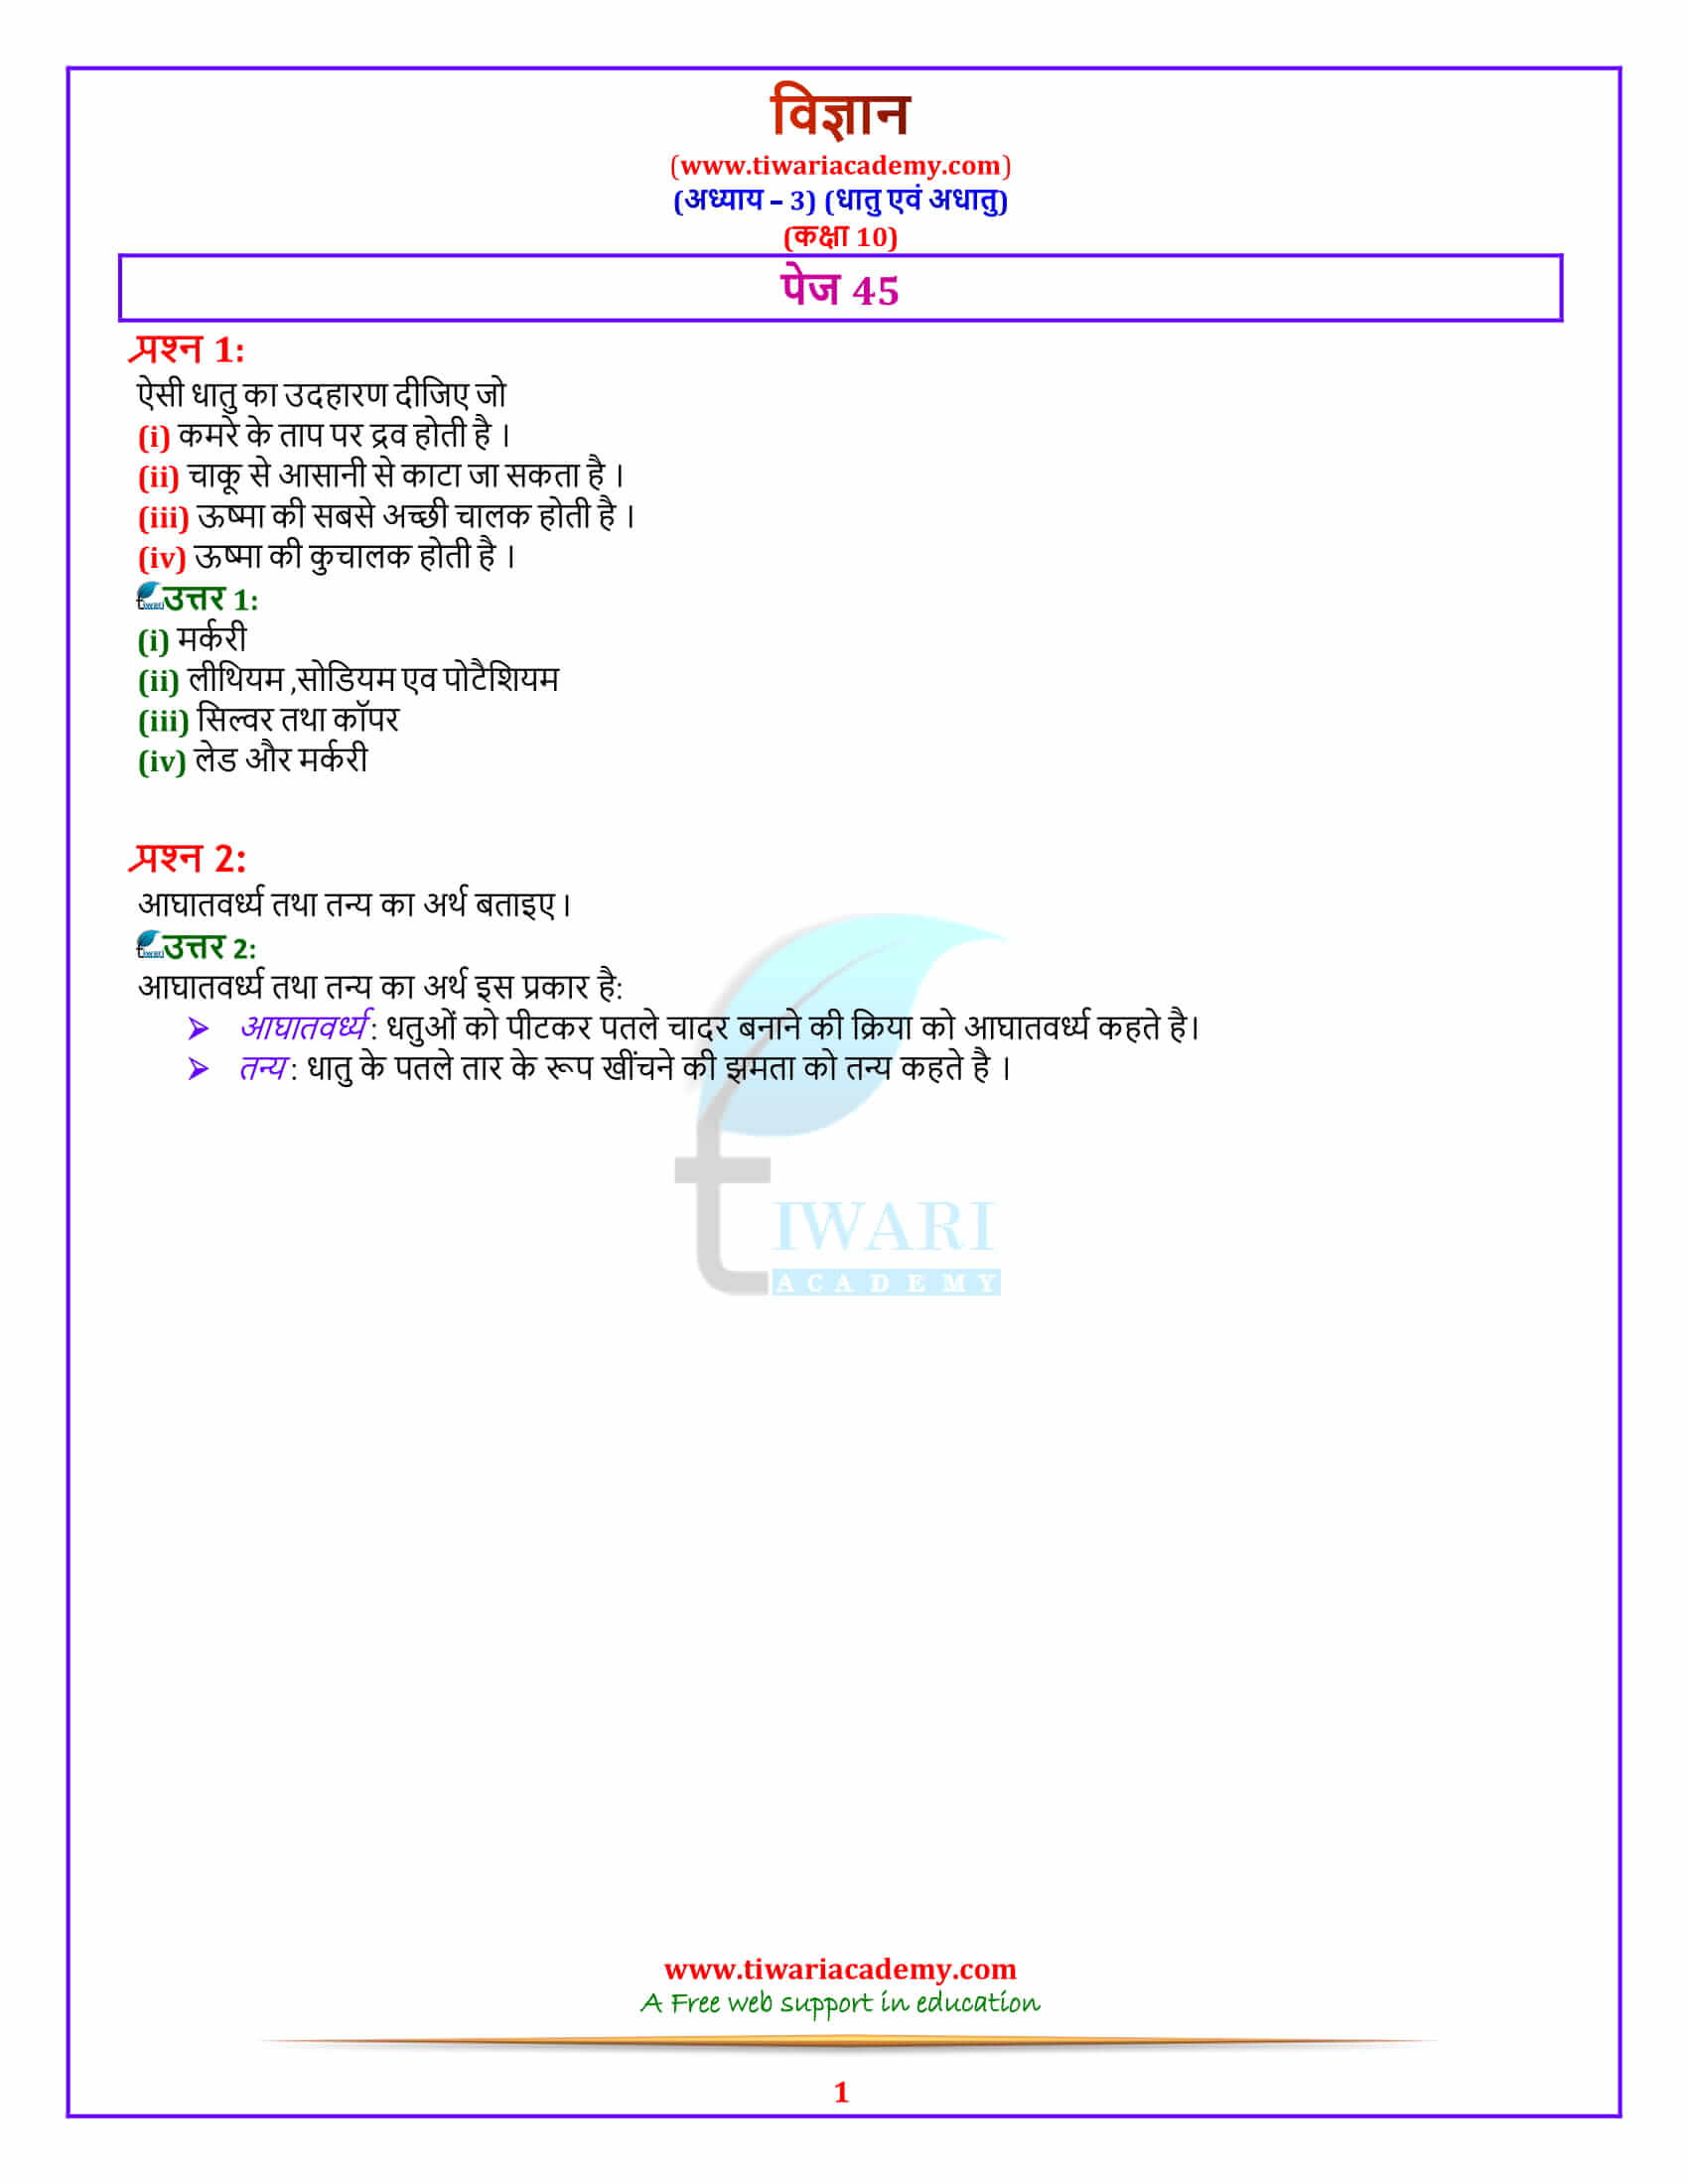 10 Science Chapter 3 Metals and Non-Metals पेज 45 के उत्तर